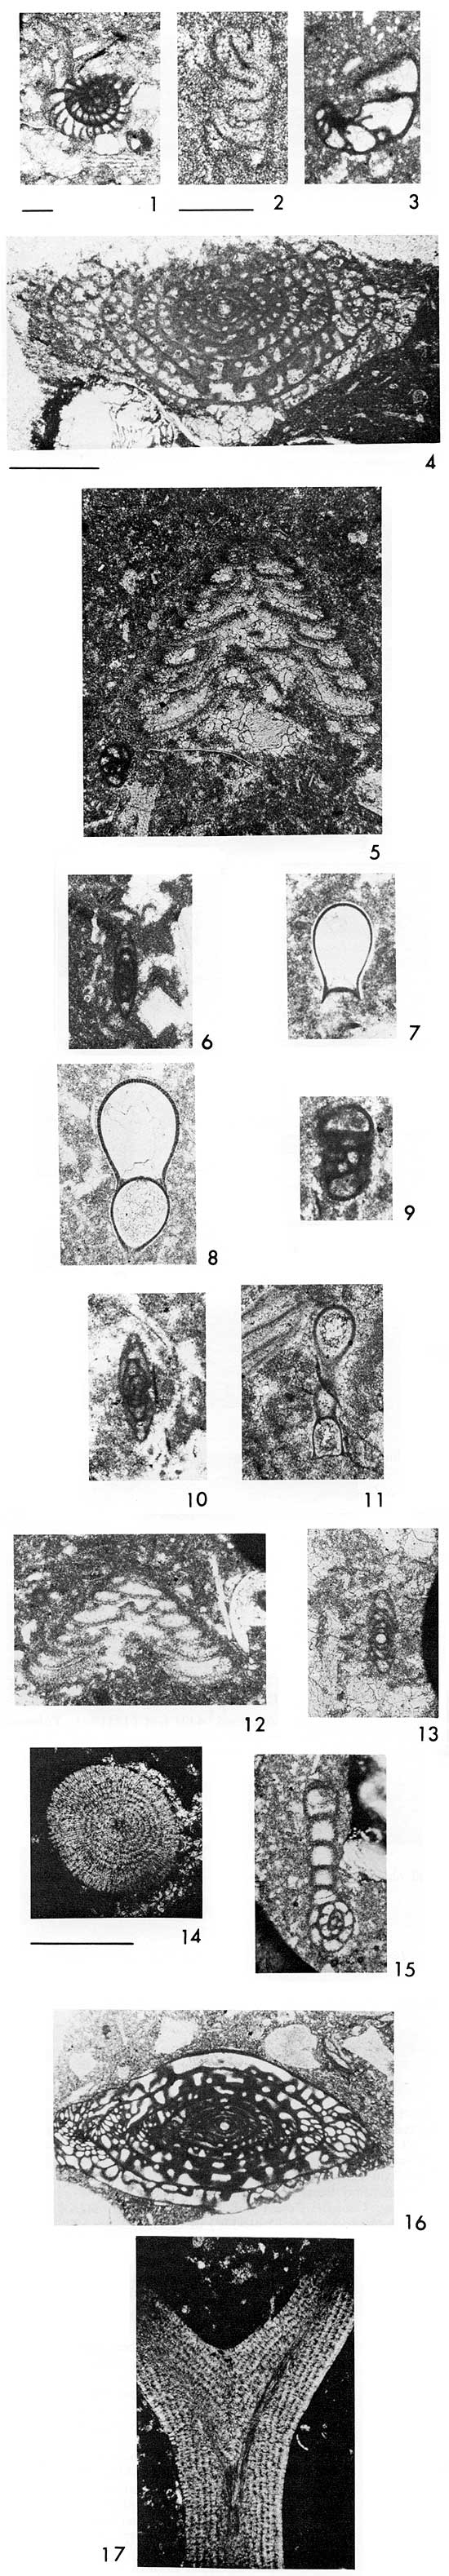 Black and white photos of microfossils in thin sections.